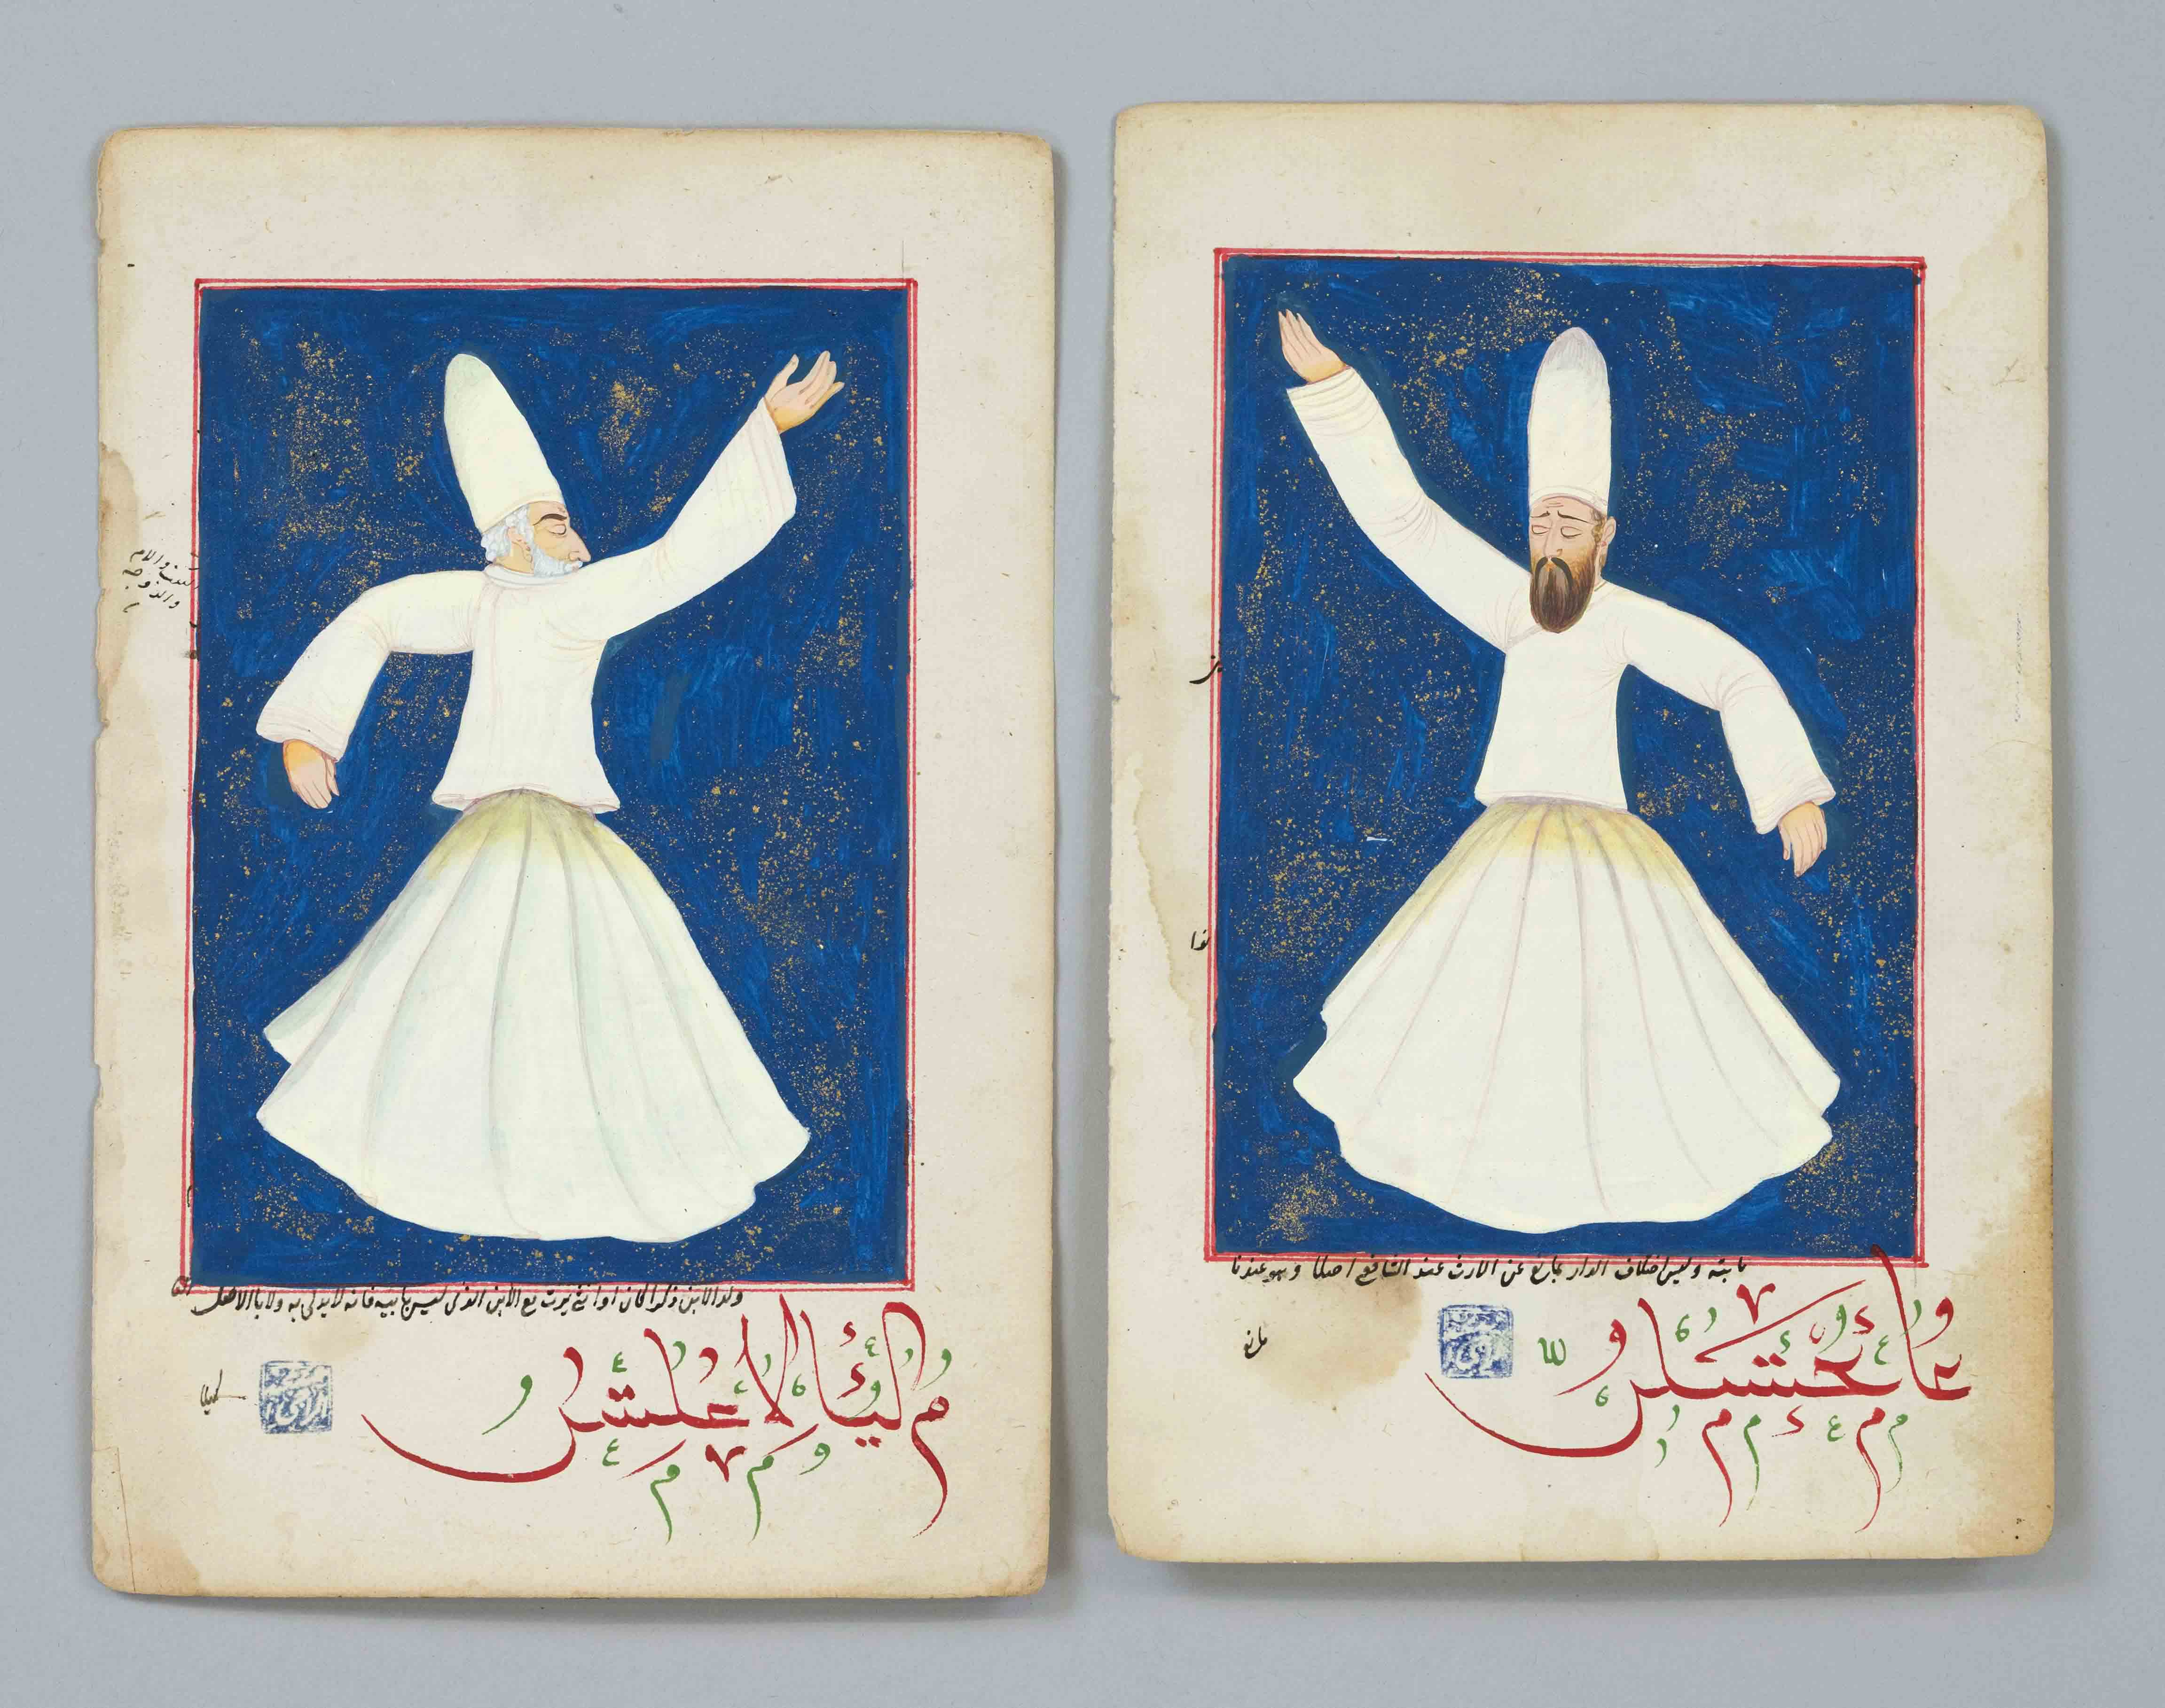 Two sheets from an illuminated Persian manuscript of the 19th century, dancing dervishes, tempera on